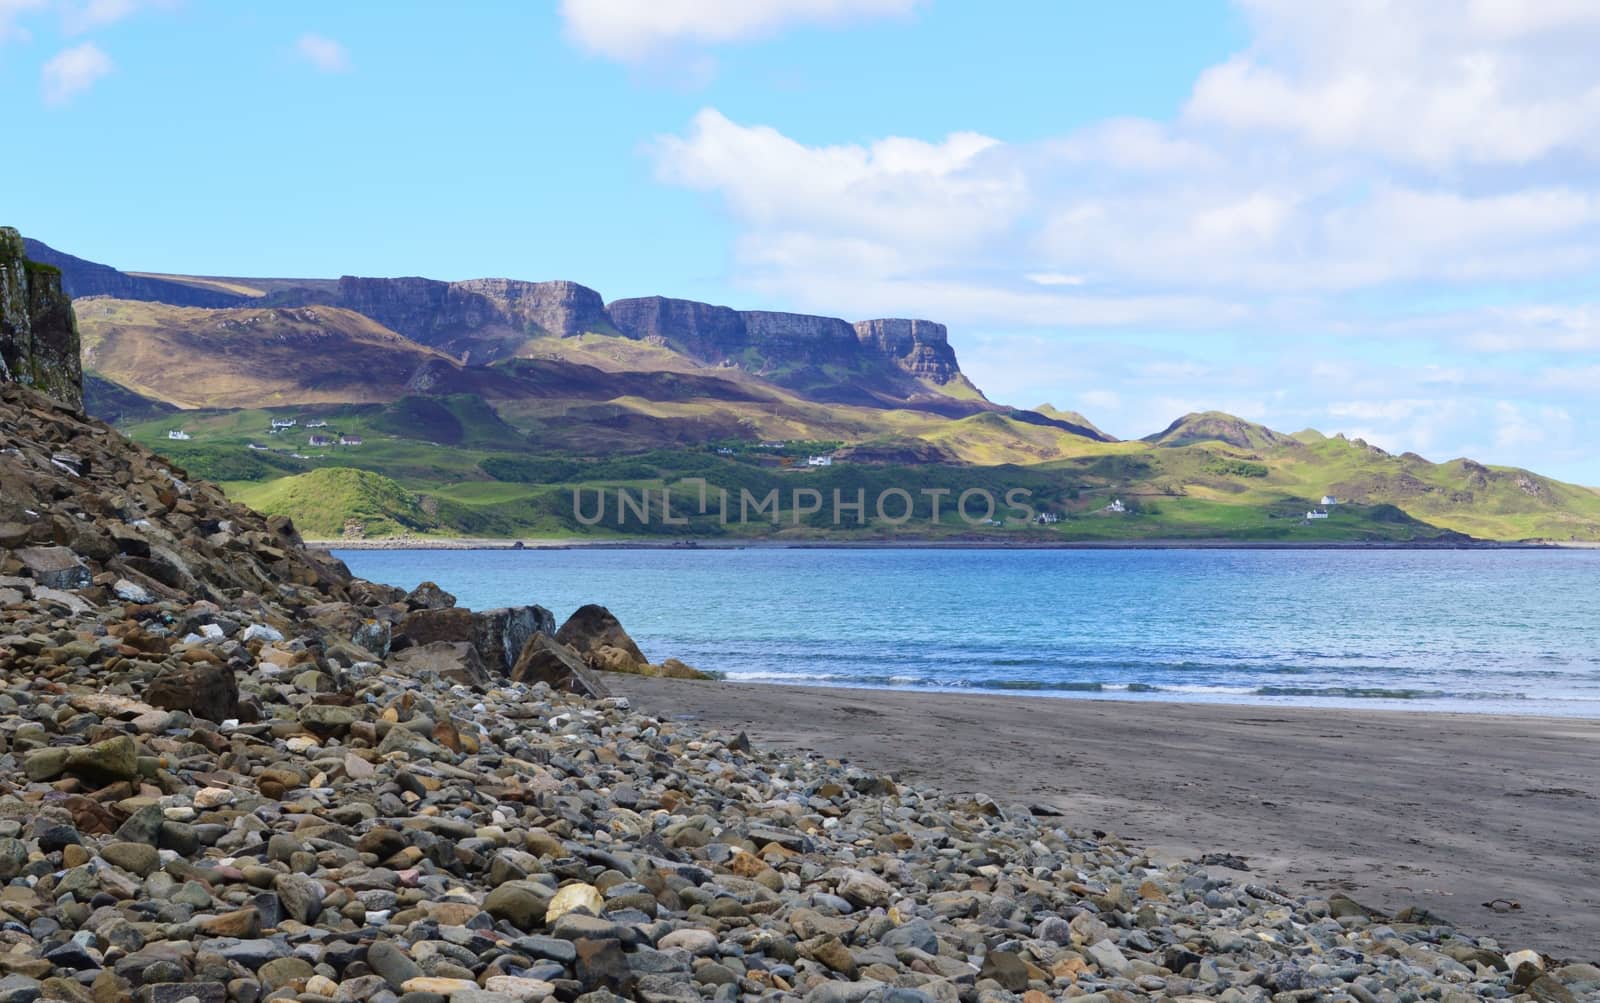 A beach scene photographed at Staffin on the Isle of Skye.